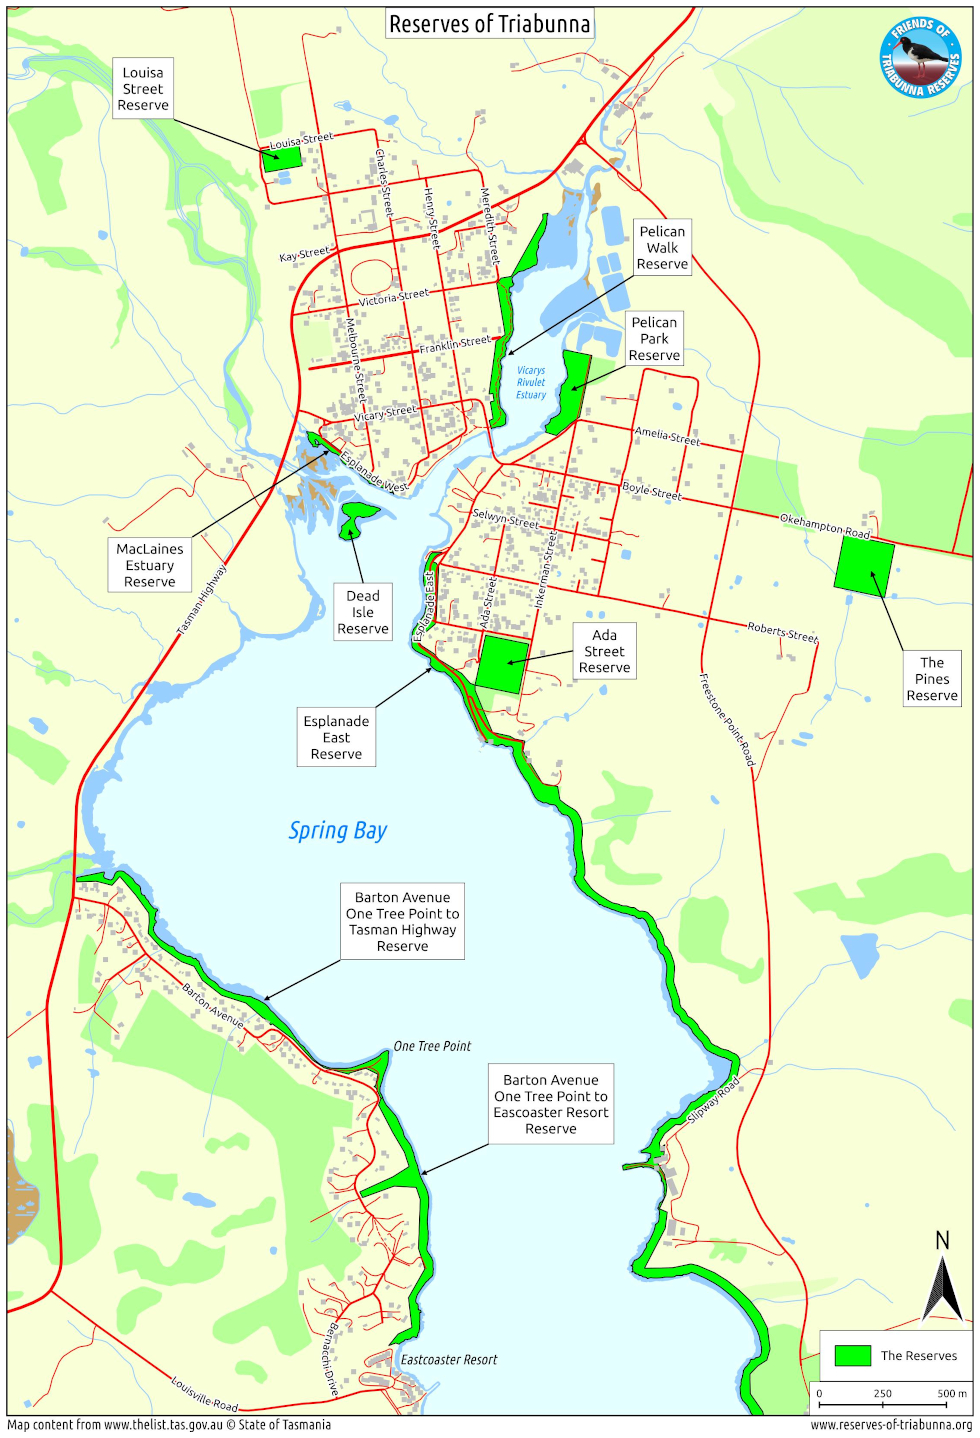 map of the Triabunna reserves